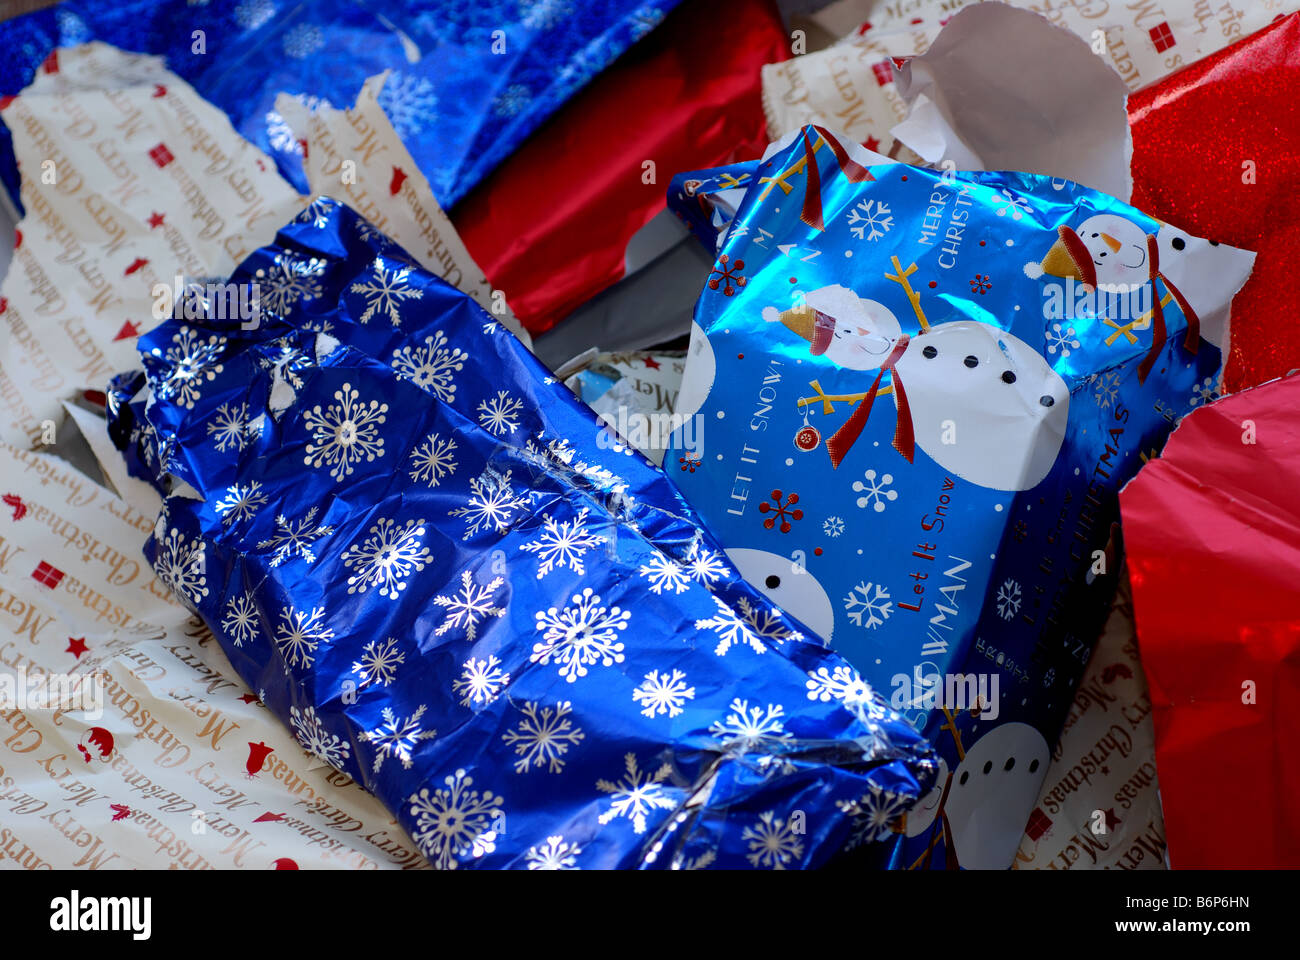 Used Christmas wrapping paper UK Stock Photo - Alamy